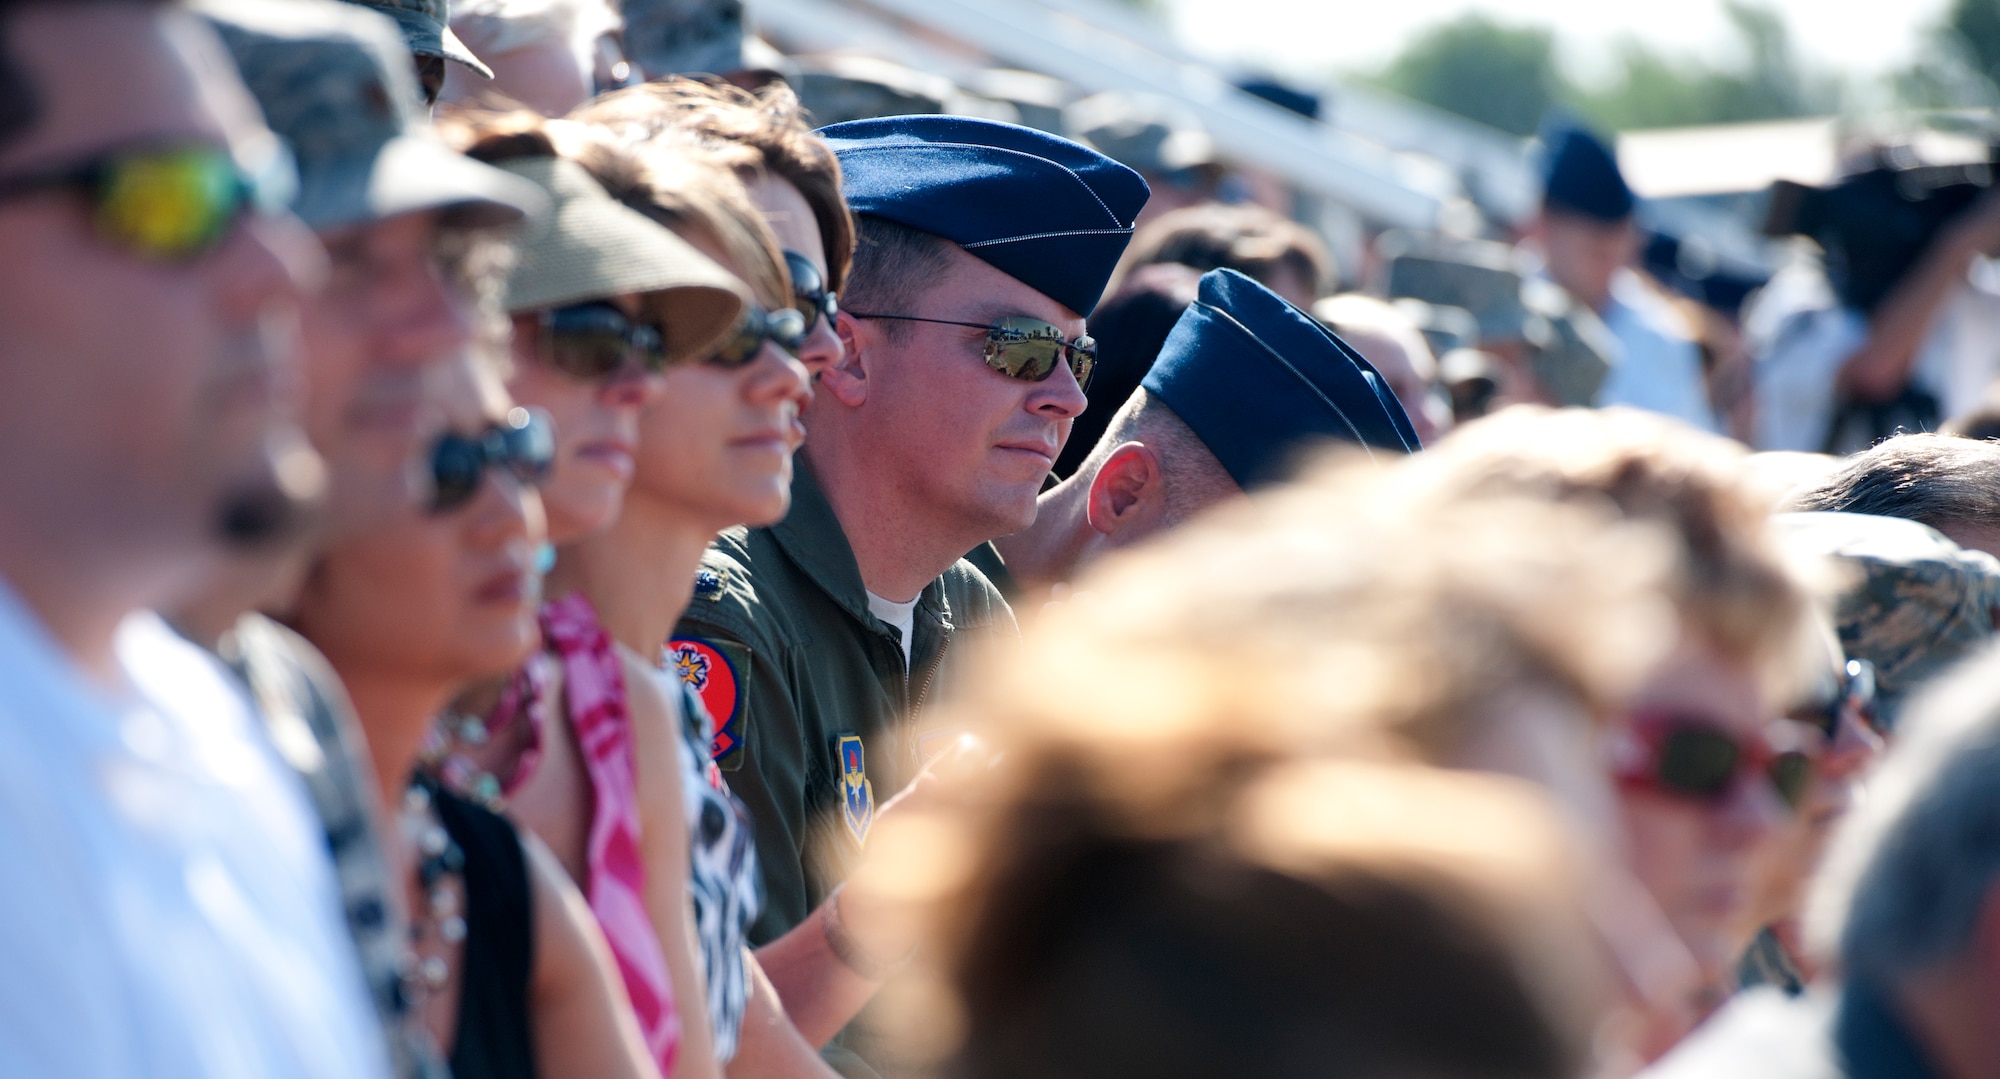 ALTUS AIR FORCE BASE, Okla. – Members of the 97th Air Mobility Wing look on as the 97th AMW change of command ceremony takes place at Wings of Freedom Park, June 27. In a centuries-old tradition, Col. William A. Spangenthal assumed command from Col. Anthony B. Krawietz. The change of command is a formal transfer of responsibility from one commander to the next. This ceremony is performed before wing members, allowing each person to observe the placing of authority and responsibility. (U.S. Air Force photo by Senior Airman Jesse Lopez / Released)